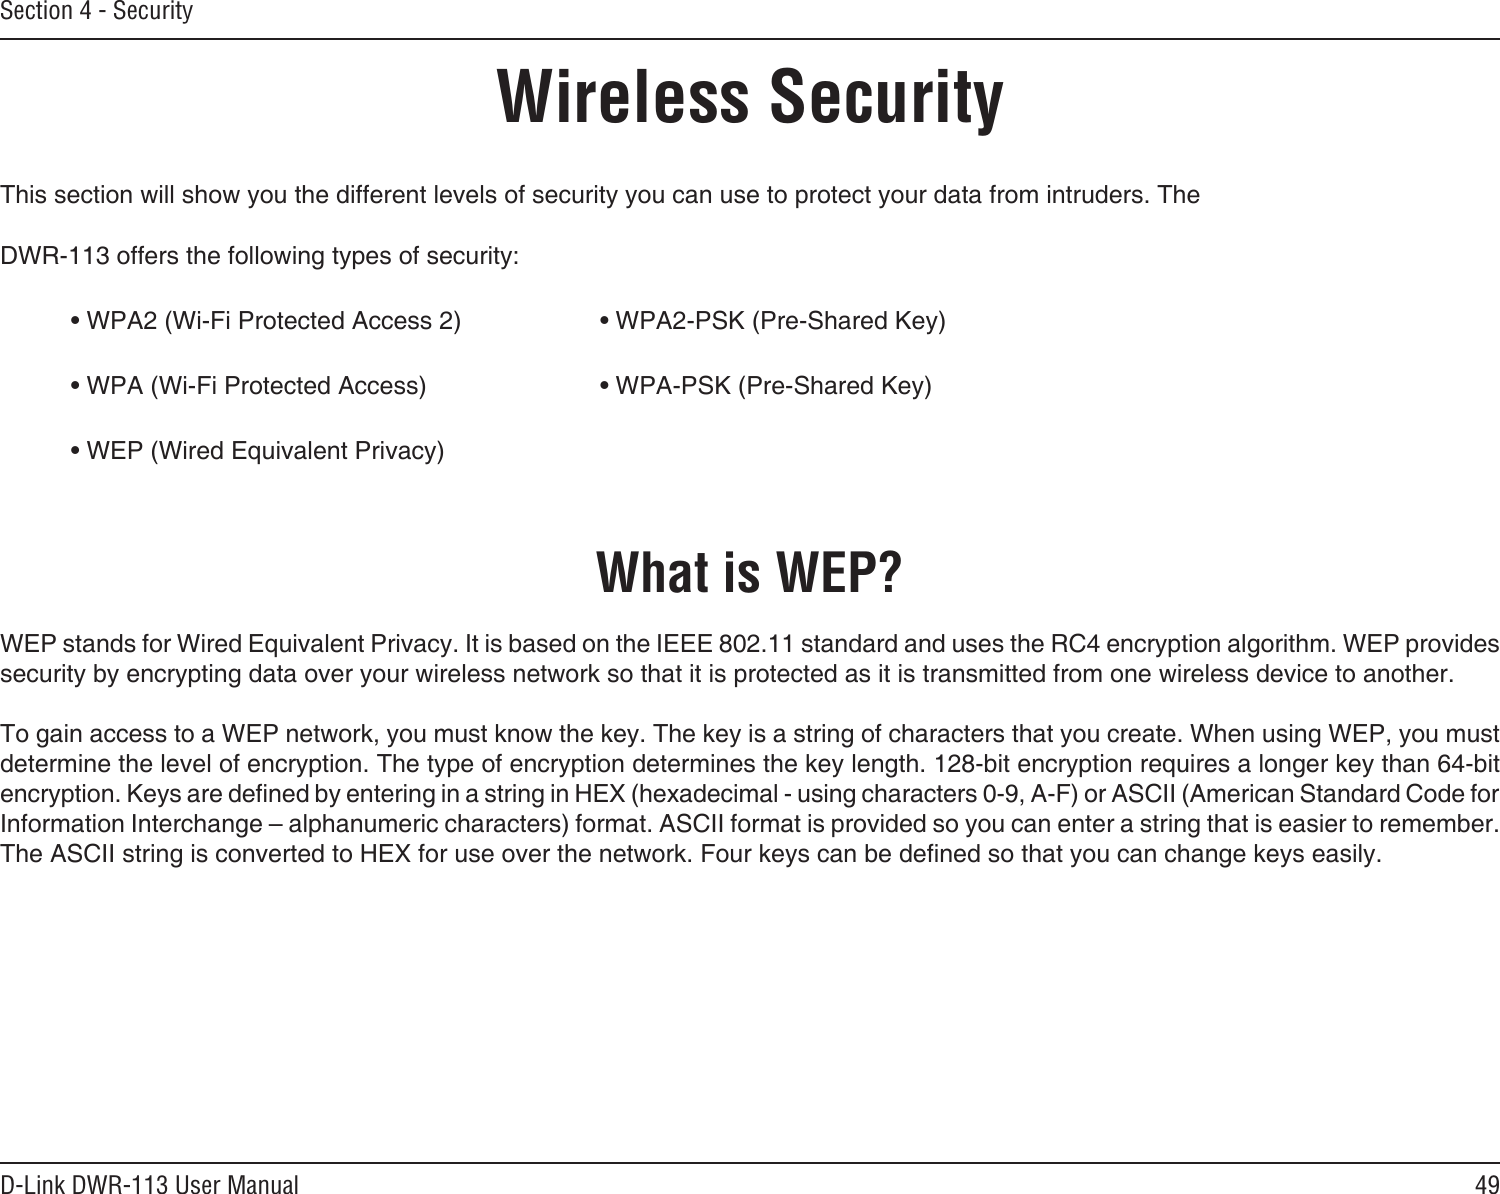 49D-Link DWR-113 User ManualSection 4 - SecurityWireless SecurityThis section will show you the different levels of security you can use to protect your data from intruders. The DWR-113 offers the following types of security:• WPA2 (Wi-Fi Protected Access 2)     • WPA2-PSK (Pre-Shared Key)• WPA (Wi-Fi Protected Access)      • WPA-PSK (Pre-Shared Key)• WEP (Wired Equivalent Privacy)What is WEP?WEP stands for Wired Equivalent Privacy. It is based on the IEEE 802.11 standard and uses the RC4 encryption algorithm. WEP provides security by encrypting data over your wireless network so that it is protected as it is transmitted from one wireless device to another.To gain access to a WEP network, you must know the key. The key is a string of characters that you create. When using WEP, you must determine the level of encryption. The type of encryption determines the key length. 128-bit encryption requires a longer key than 64-bit encryption. Keys are dened by entering in a string in HEX (hexadecimal - using characters 0-9, A-F) or ASCII (American Standard Code for Information Interchange – alphanumeric characters) format. ASCII format is provided so you can enter a string that is easier to remember. The ASCII string is converted to HEX for use over the network. Four keys can be dened so that you can change keys easily.